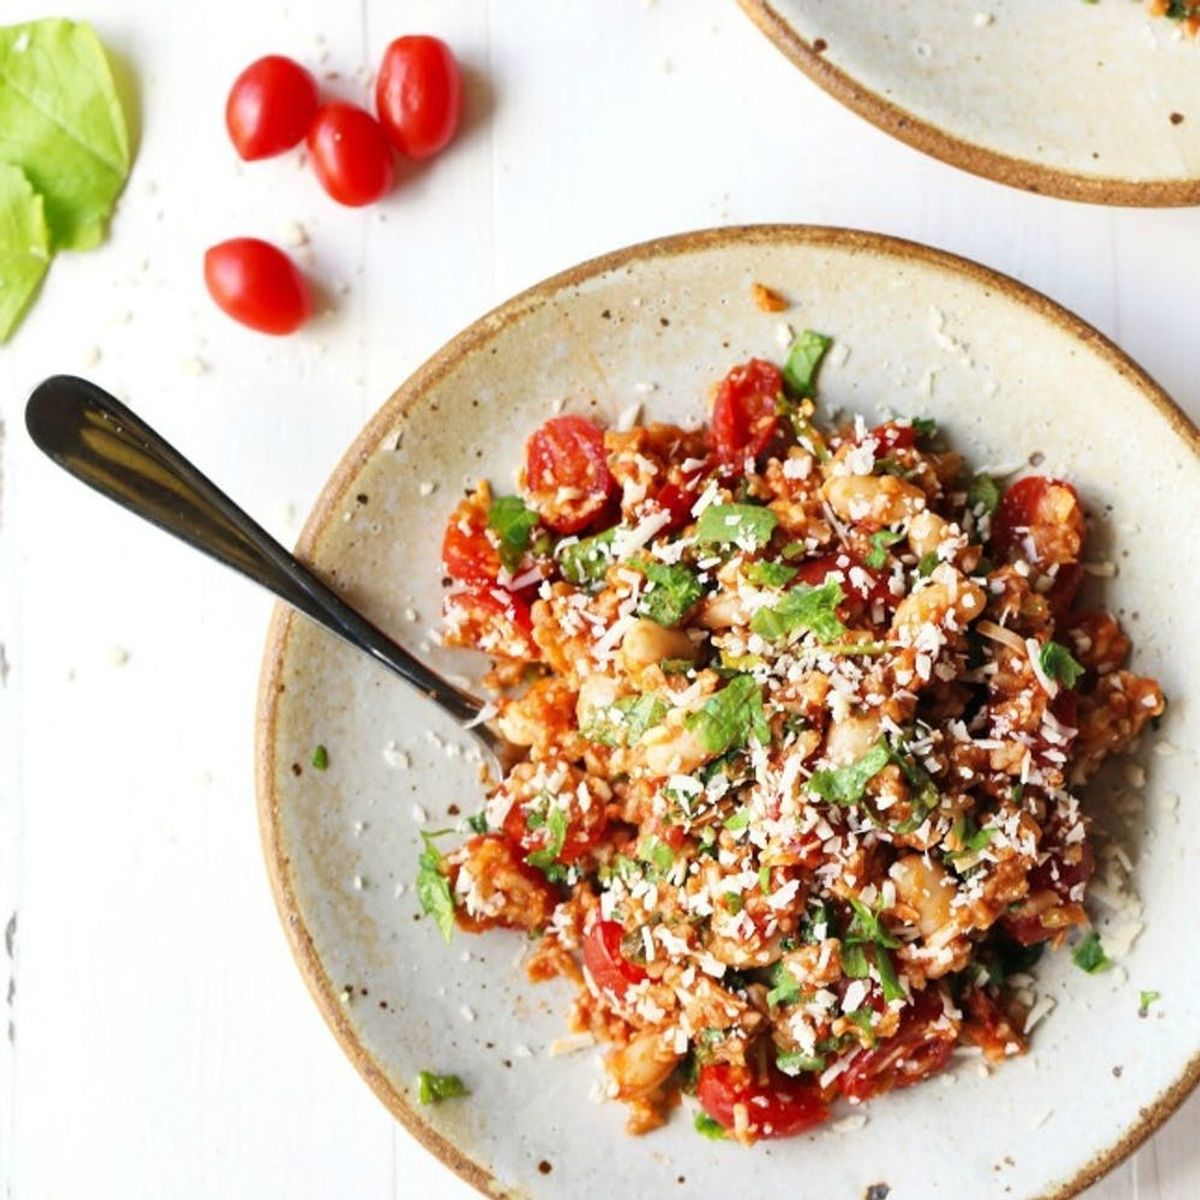 Go Meatless With 16 Hearty Vegetarian Meal Ideas